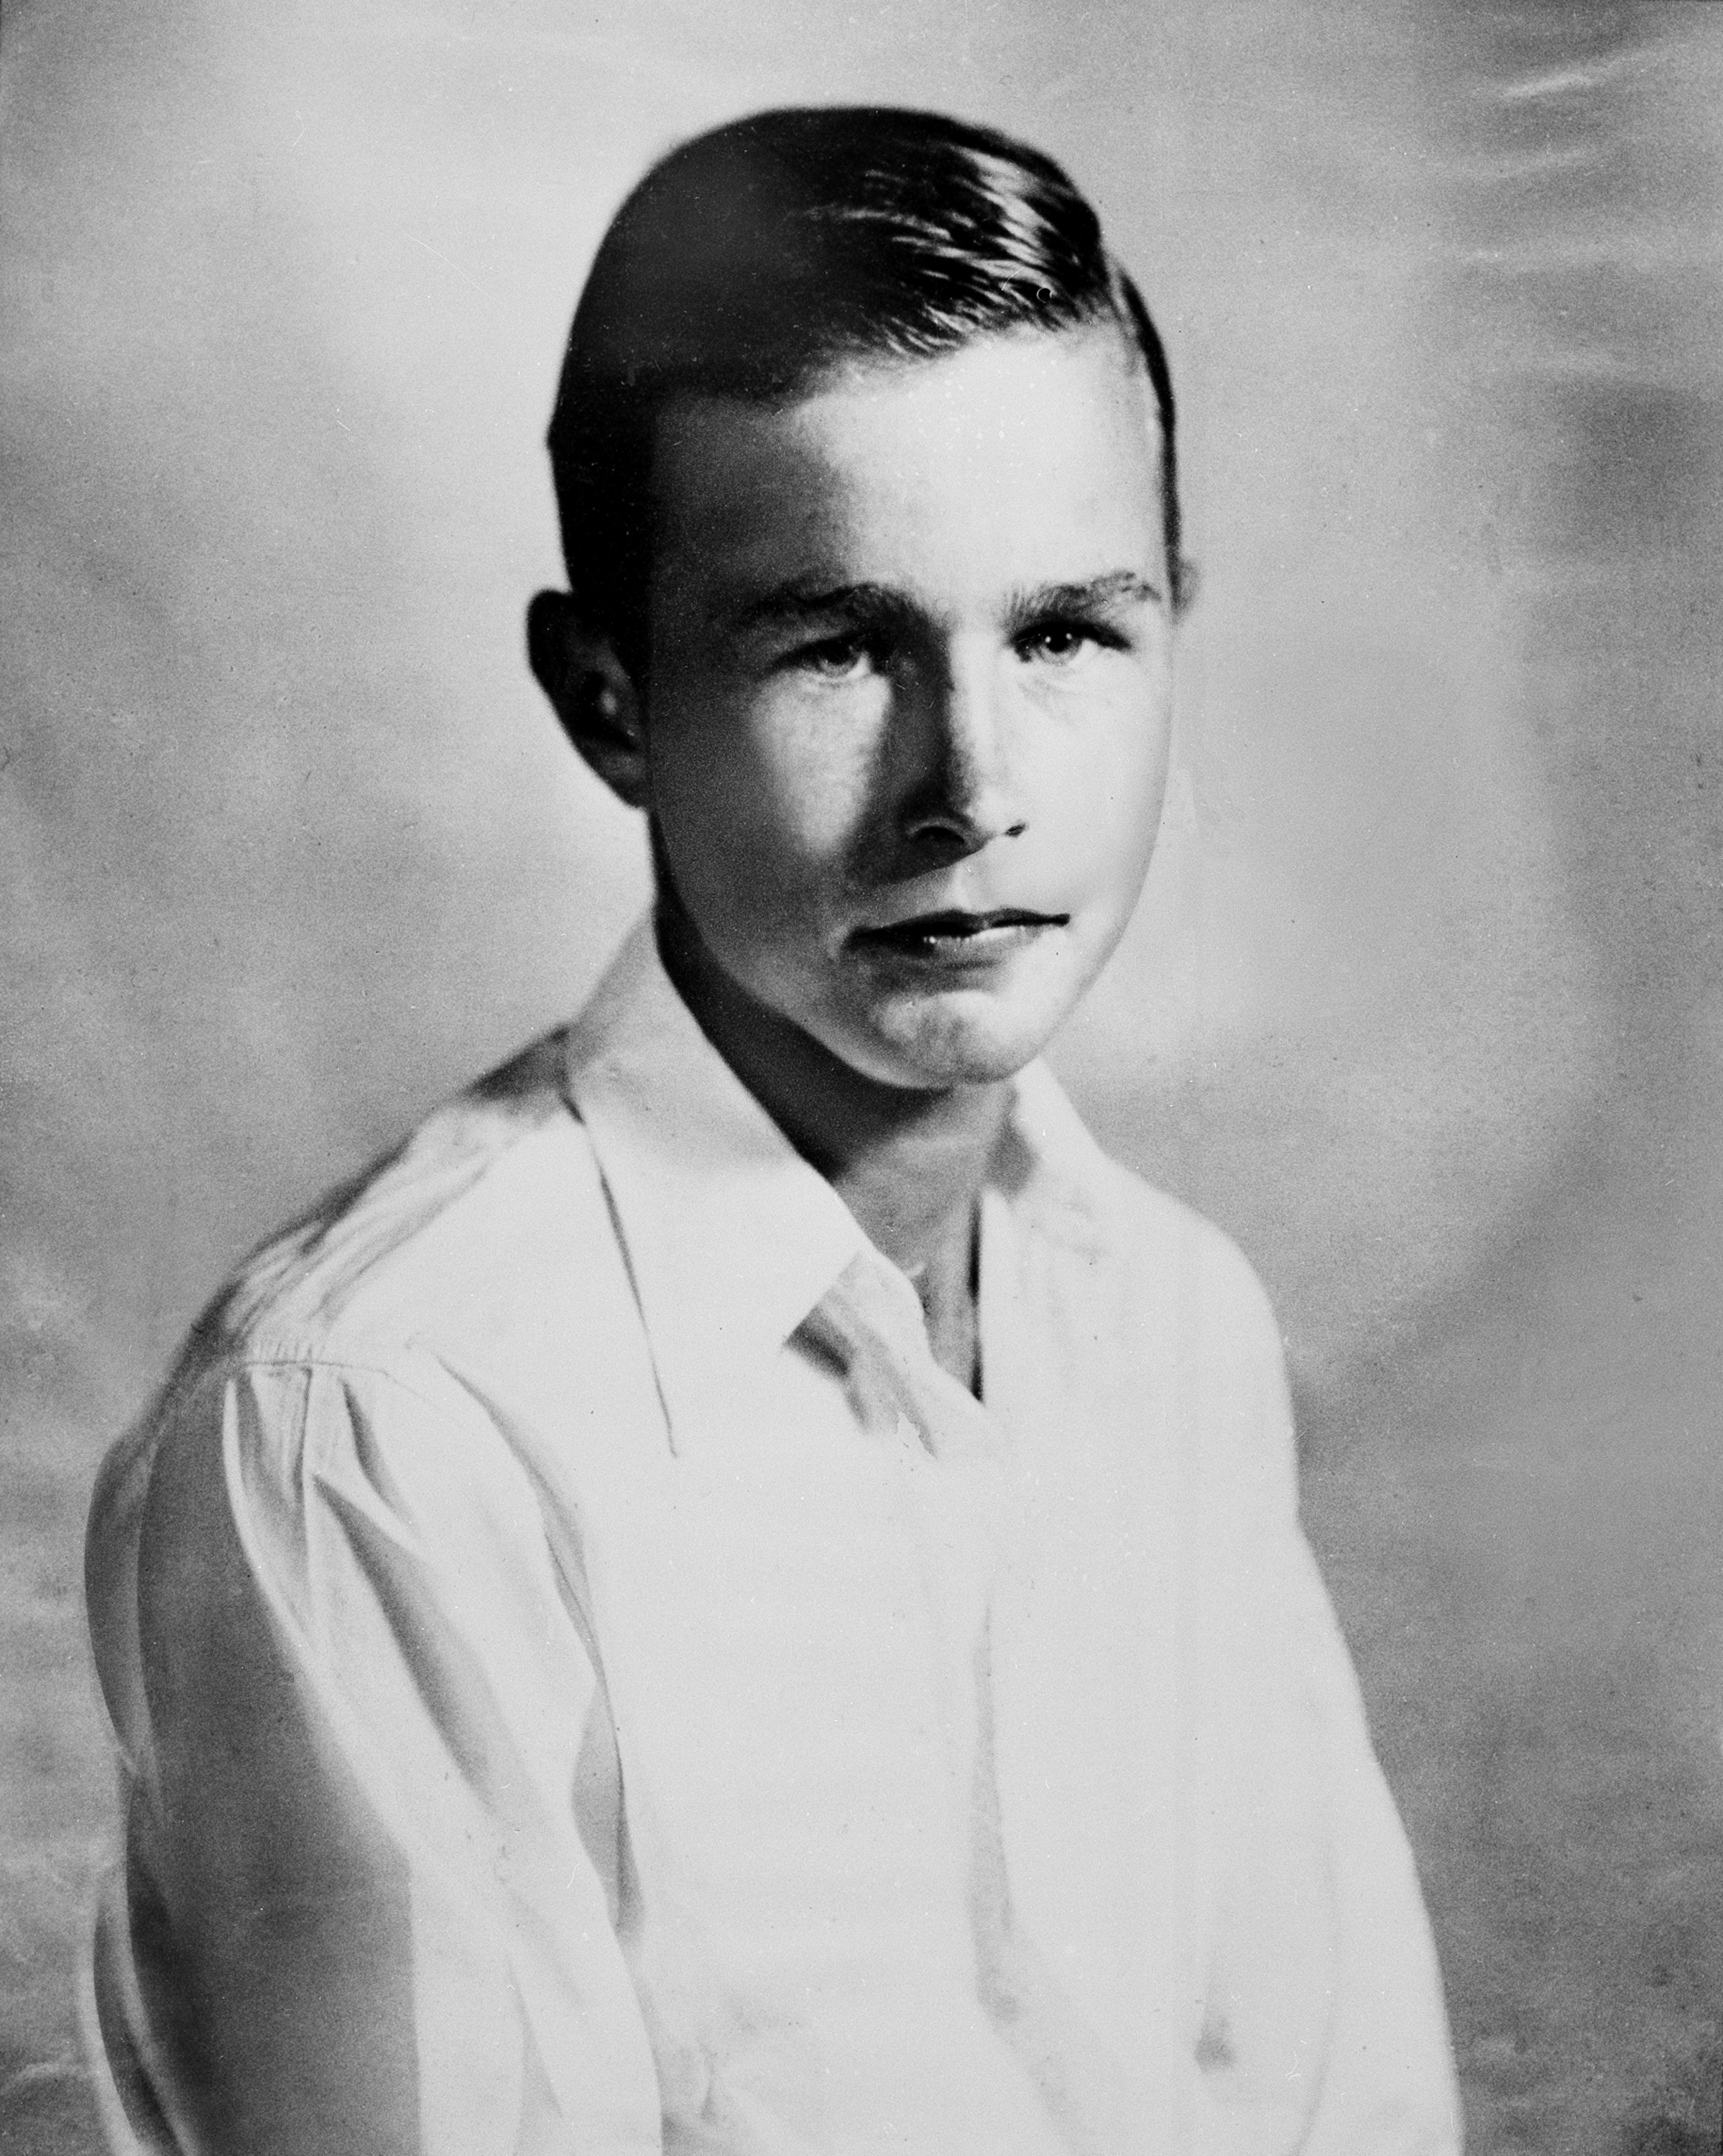 George Bush is shown at age 14 or 15 in 1939. Bush was born in 1924 in Milton, Mass., and grew up in Greenwich, Conn. (AP)